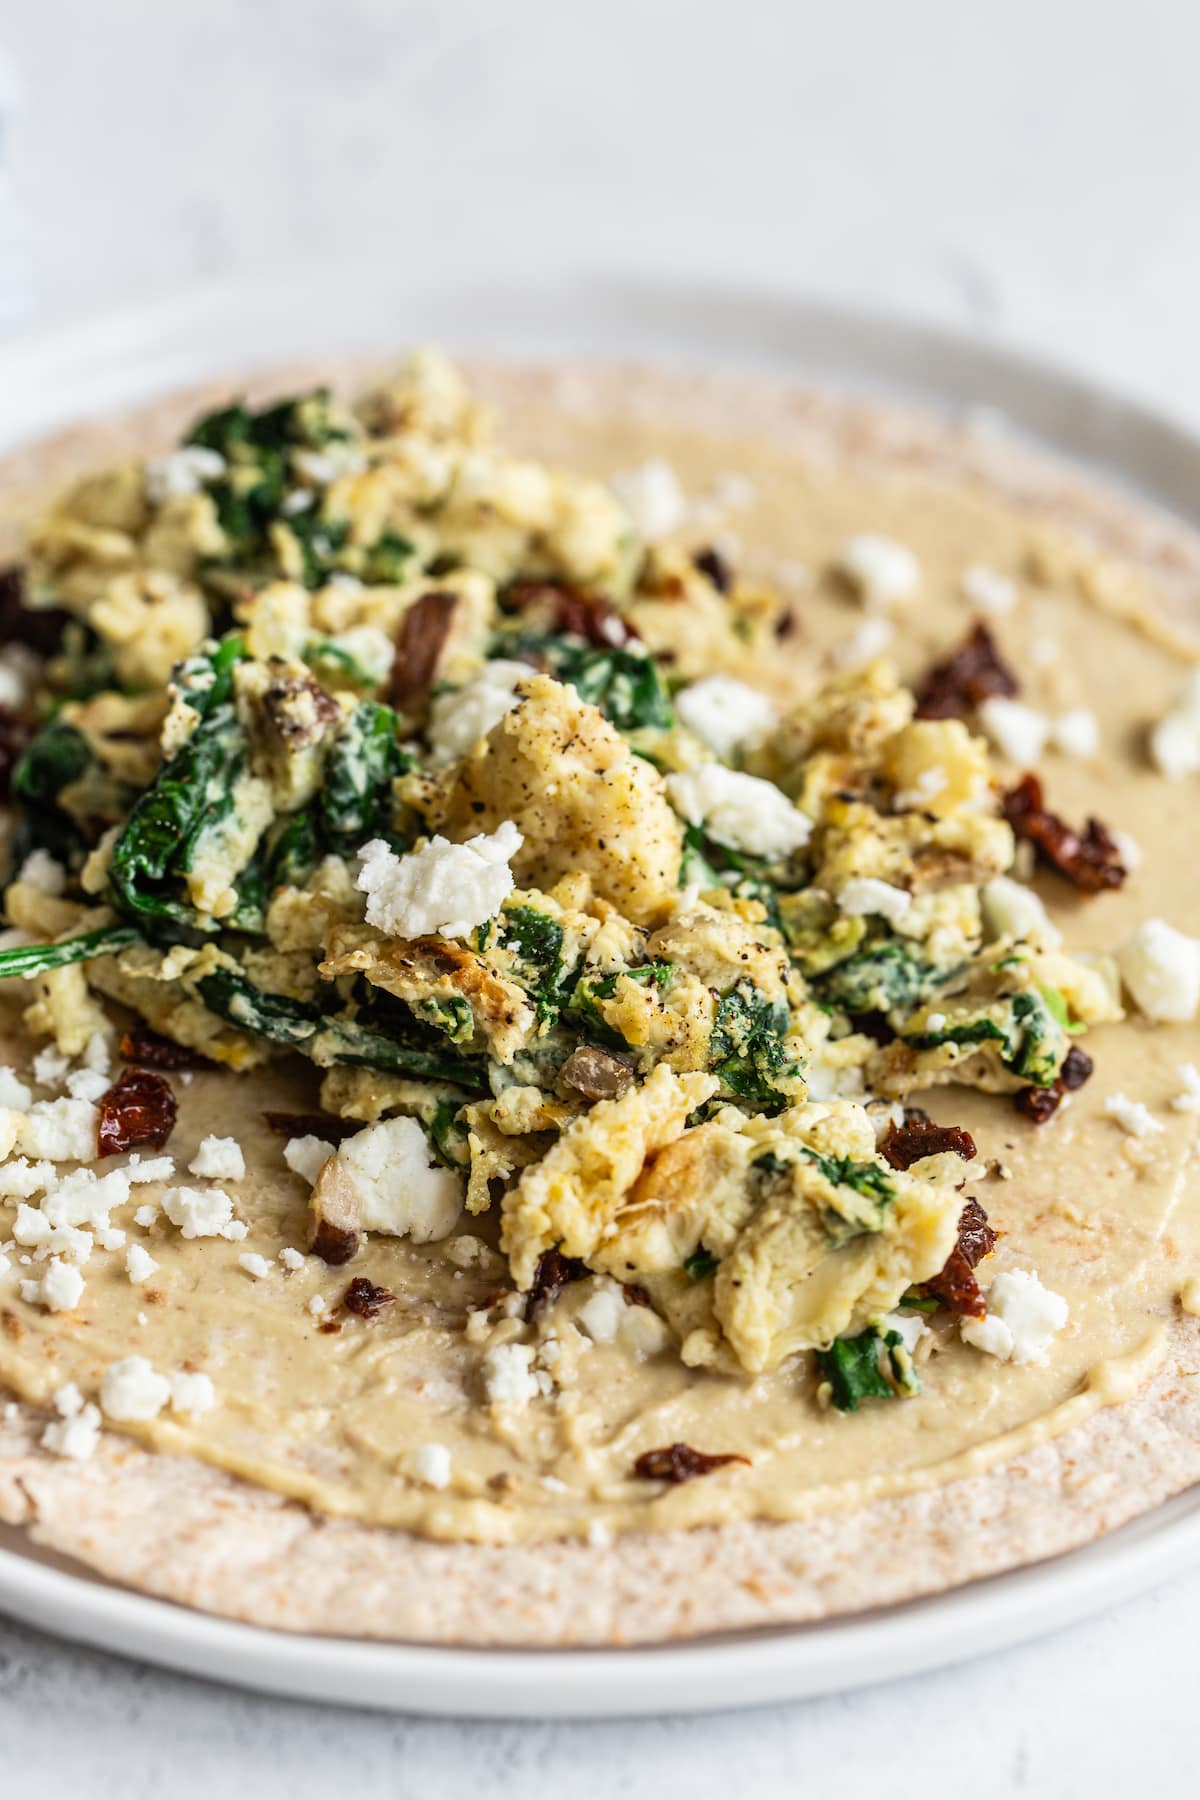 Wrap topped with hummus, eggs, cheese, spinach and sun-dried tomatoes.